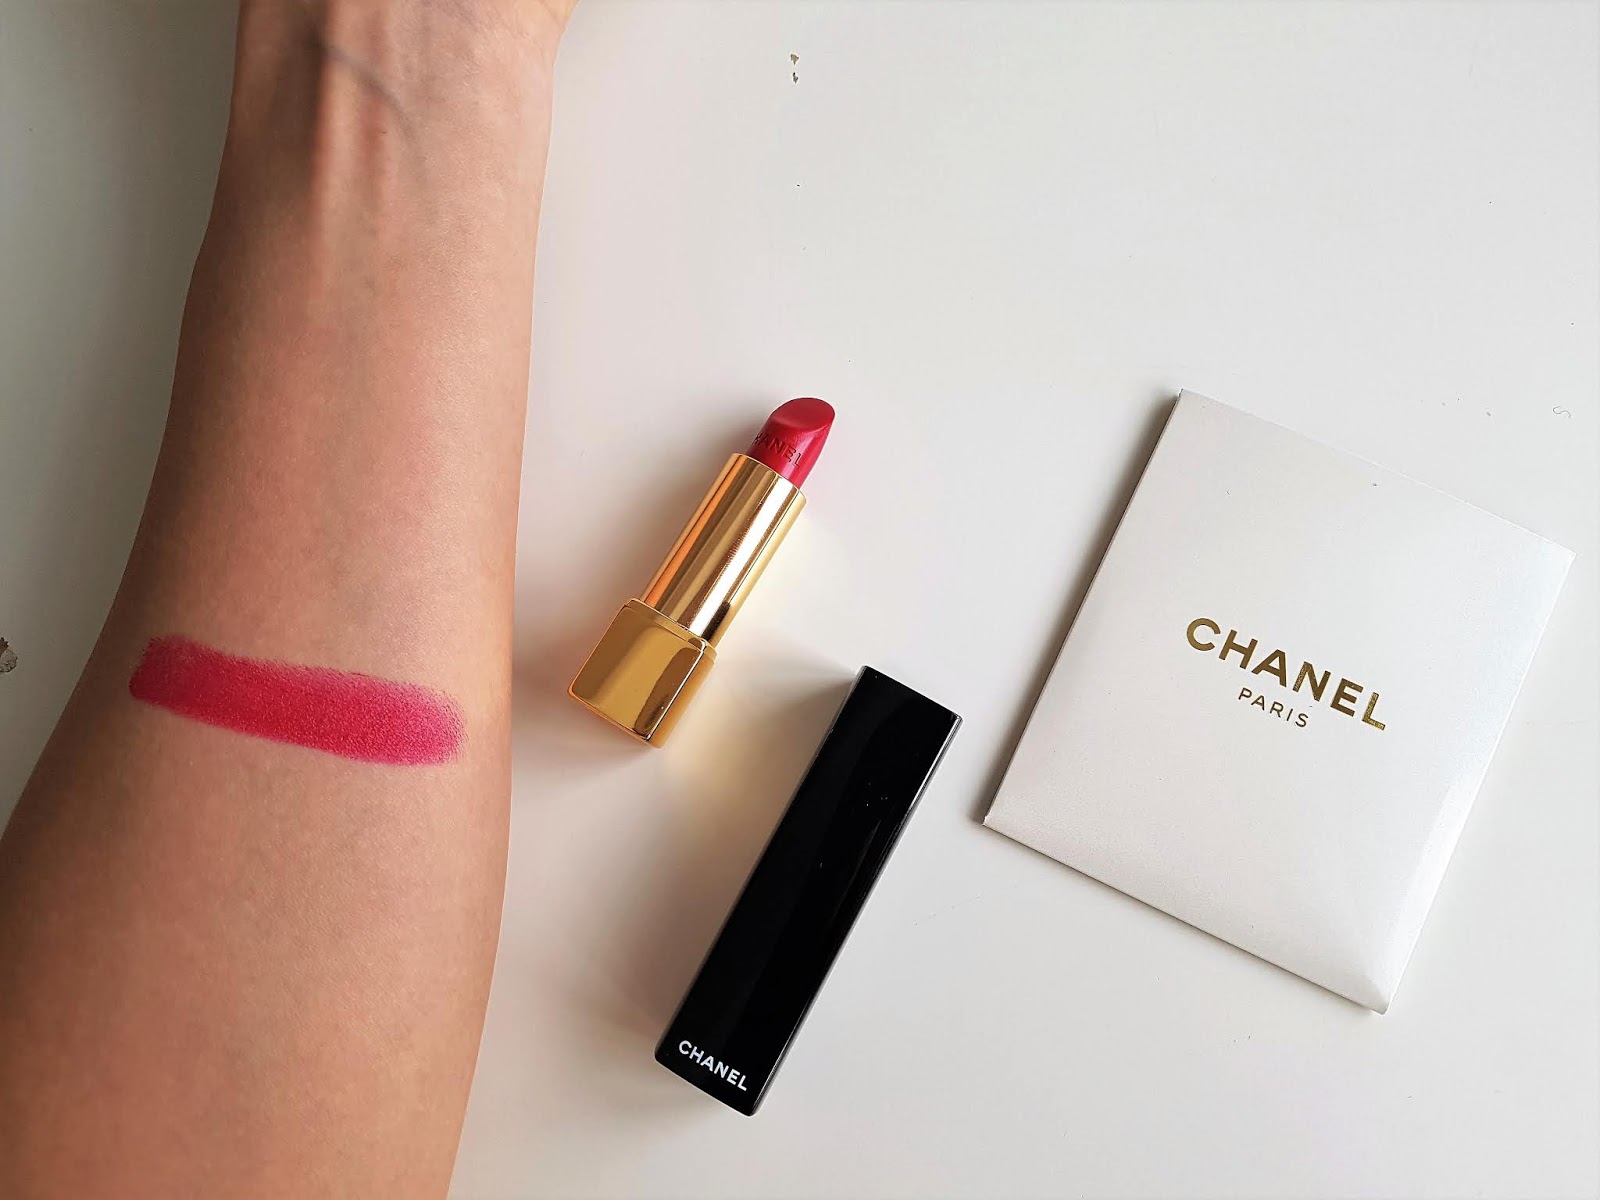 THE EXCLUSIVE BEAUTY DIARY : CHANEL ROUGE COCO ULTRA HYDRATING LIP